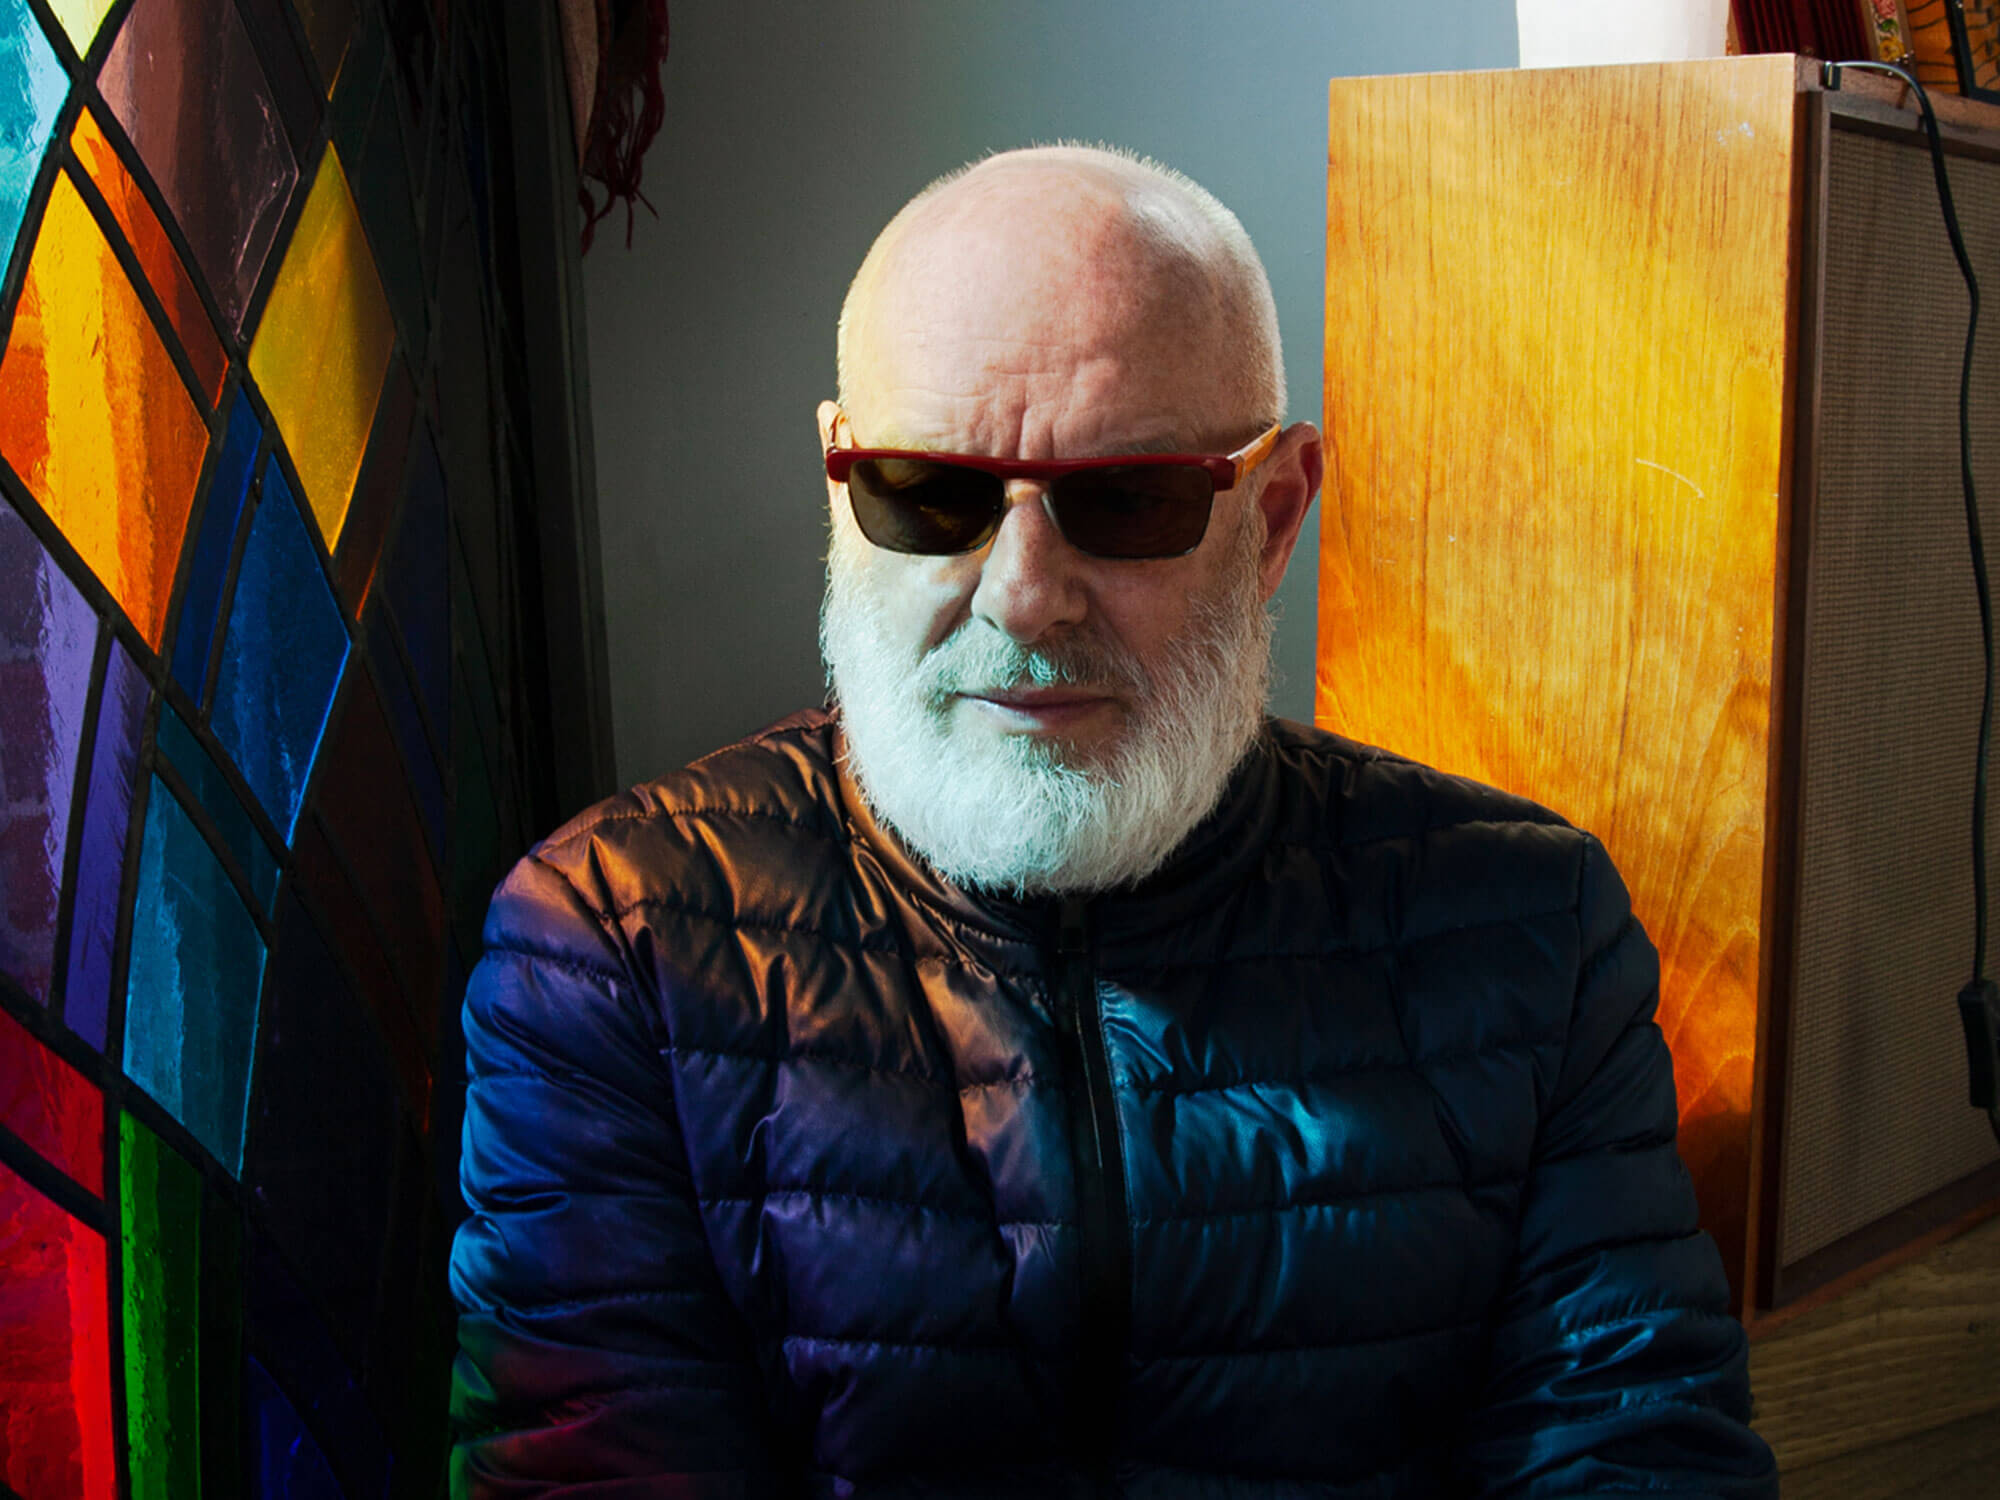 Brian Eno in sunglasses next to a stain-glass window